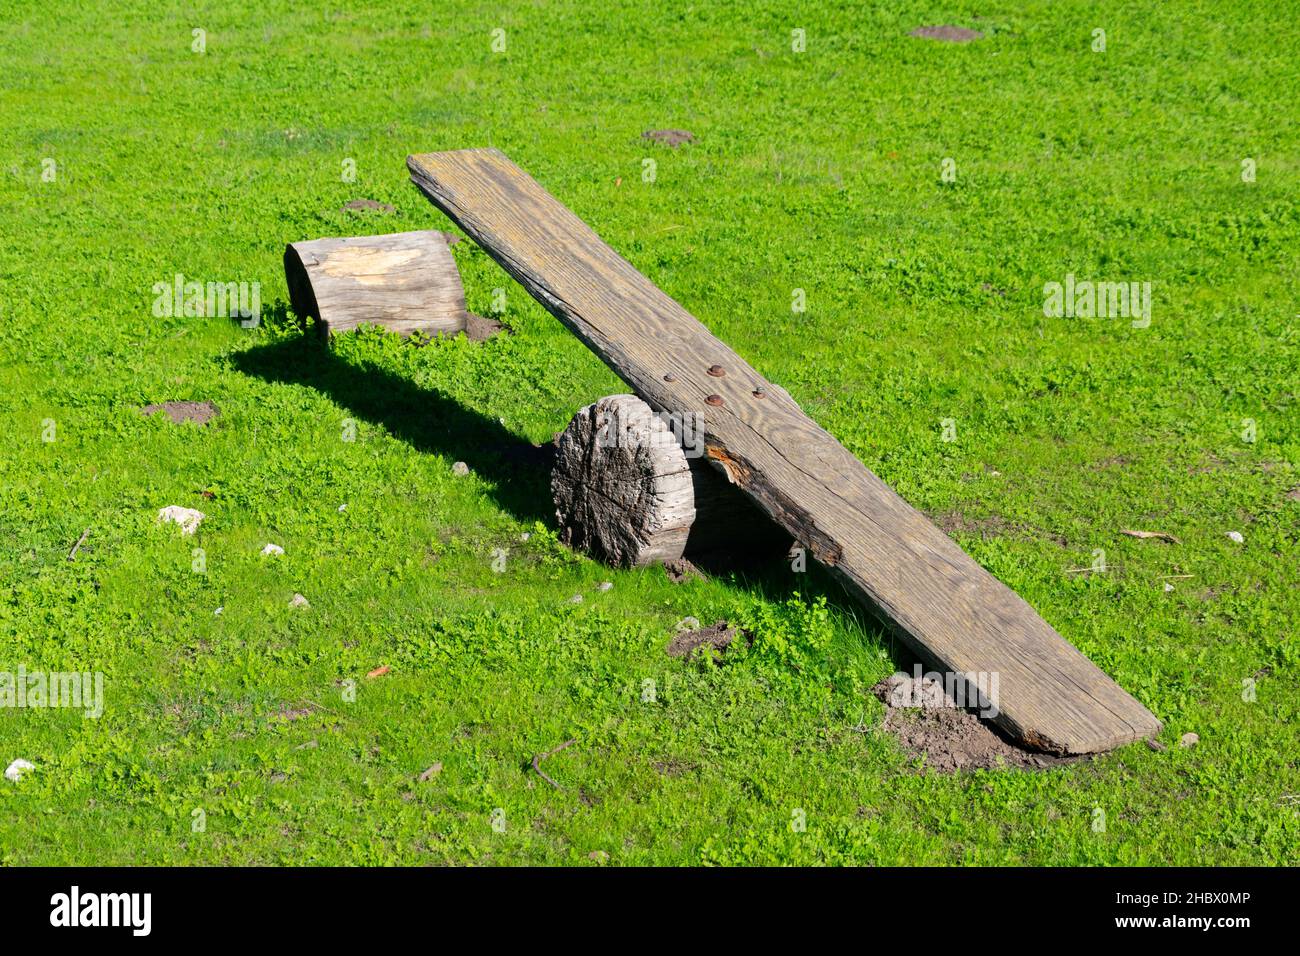 Teeter totter, seesaw made of wooden board and log on a green grass. Stock Photo